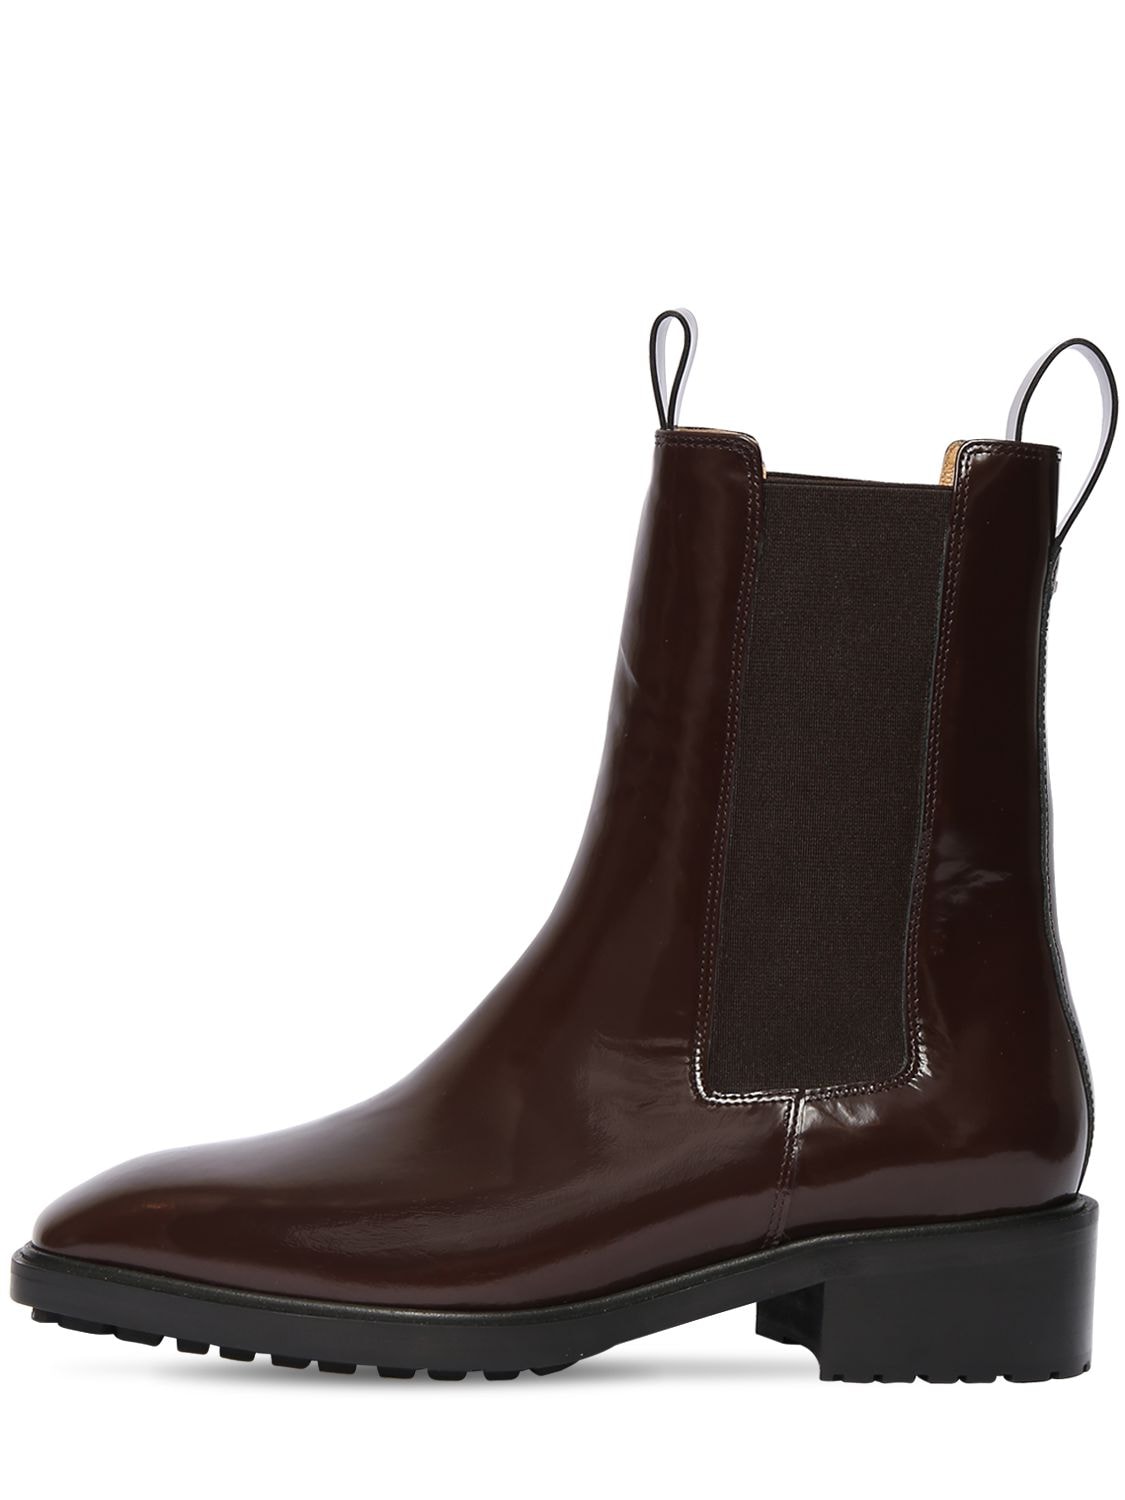 Mm Simone Brushed Leather Ankle Boots - AEYDE - Modalova